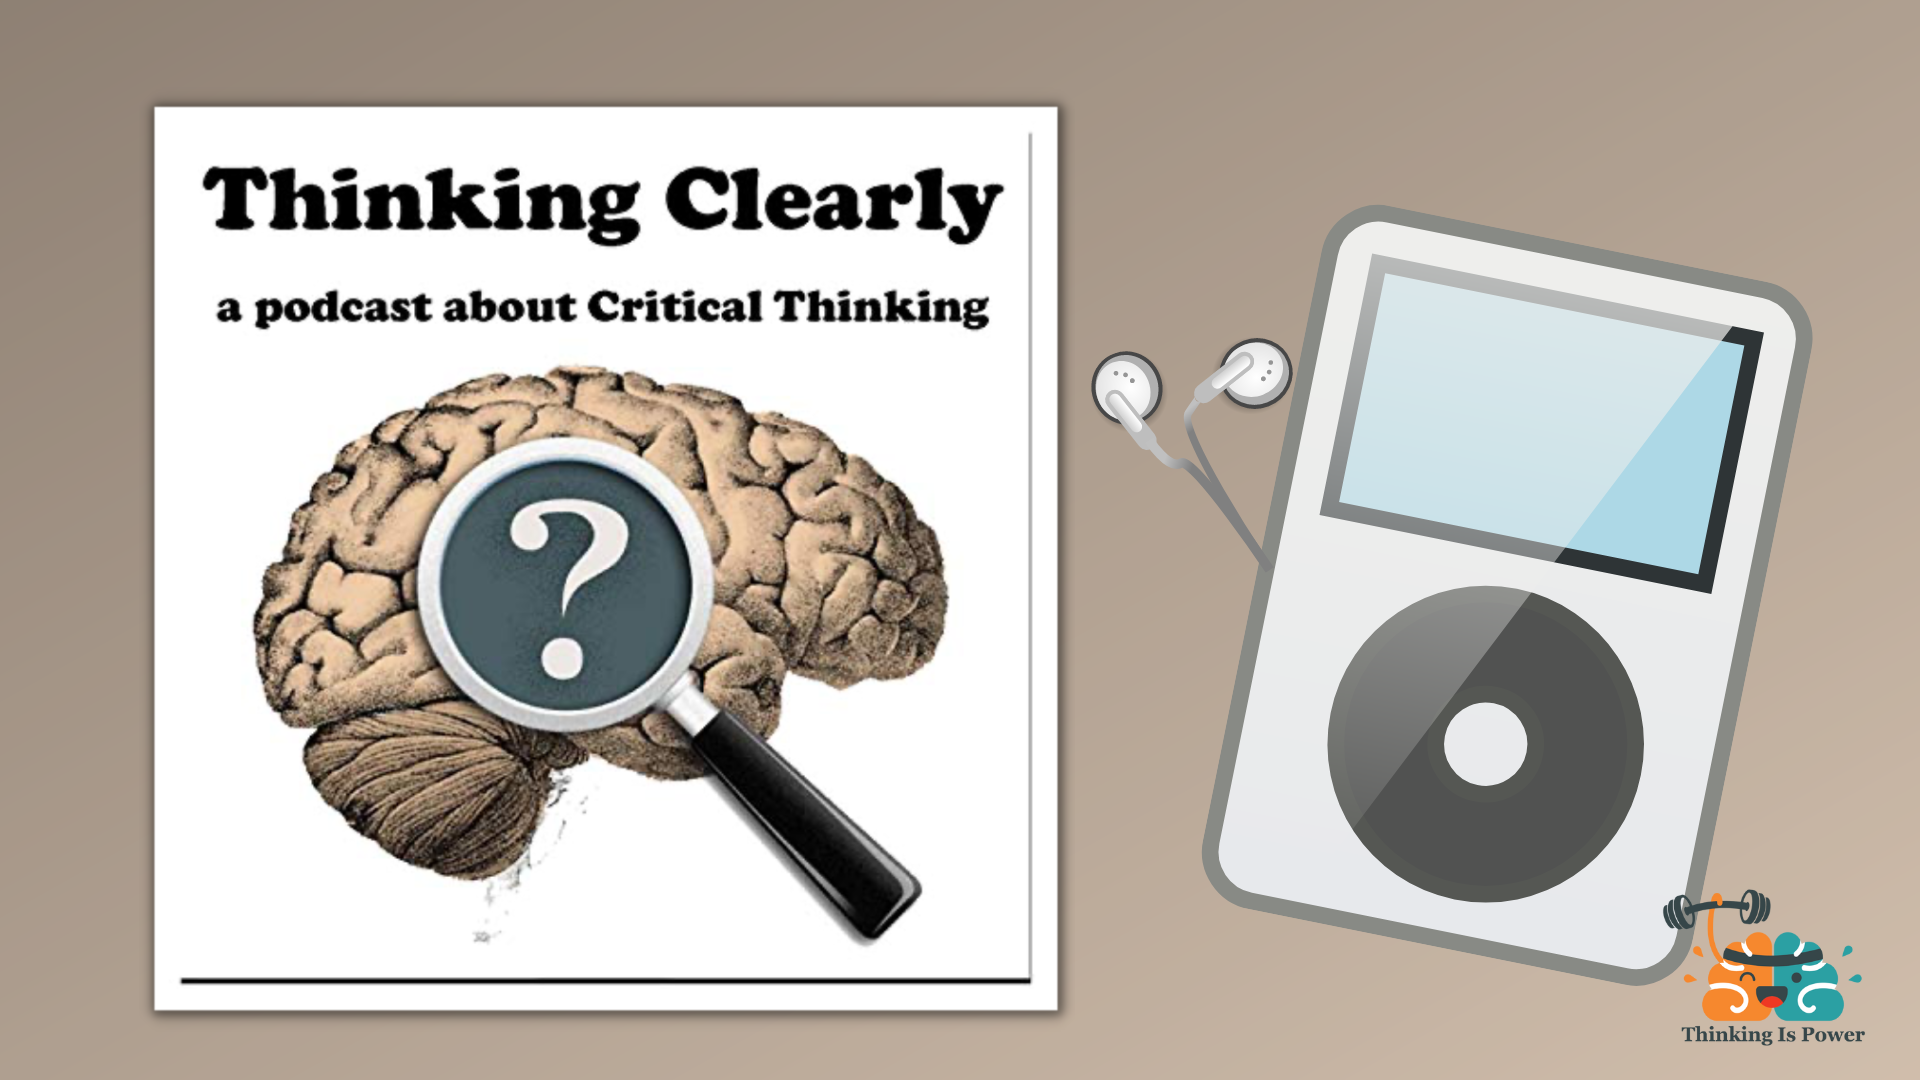 Melanie Trecek-King from Thinking Is Power on the Thinking Clearly Podcast